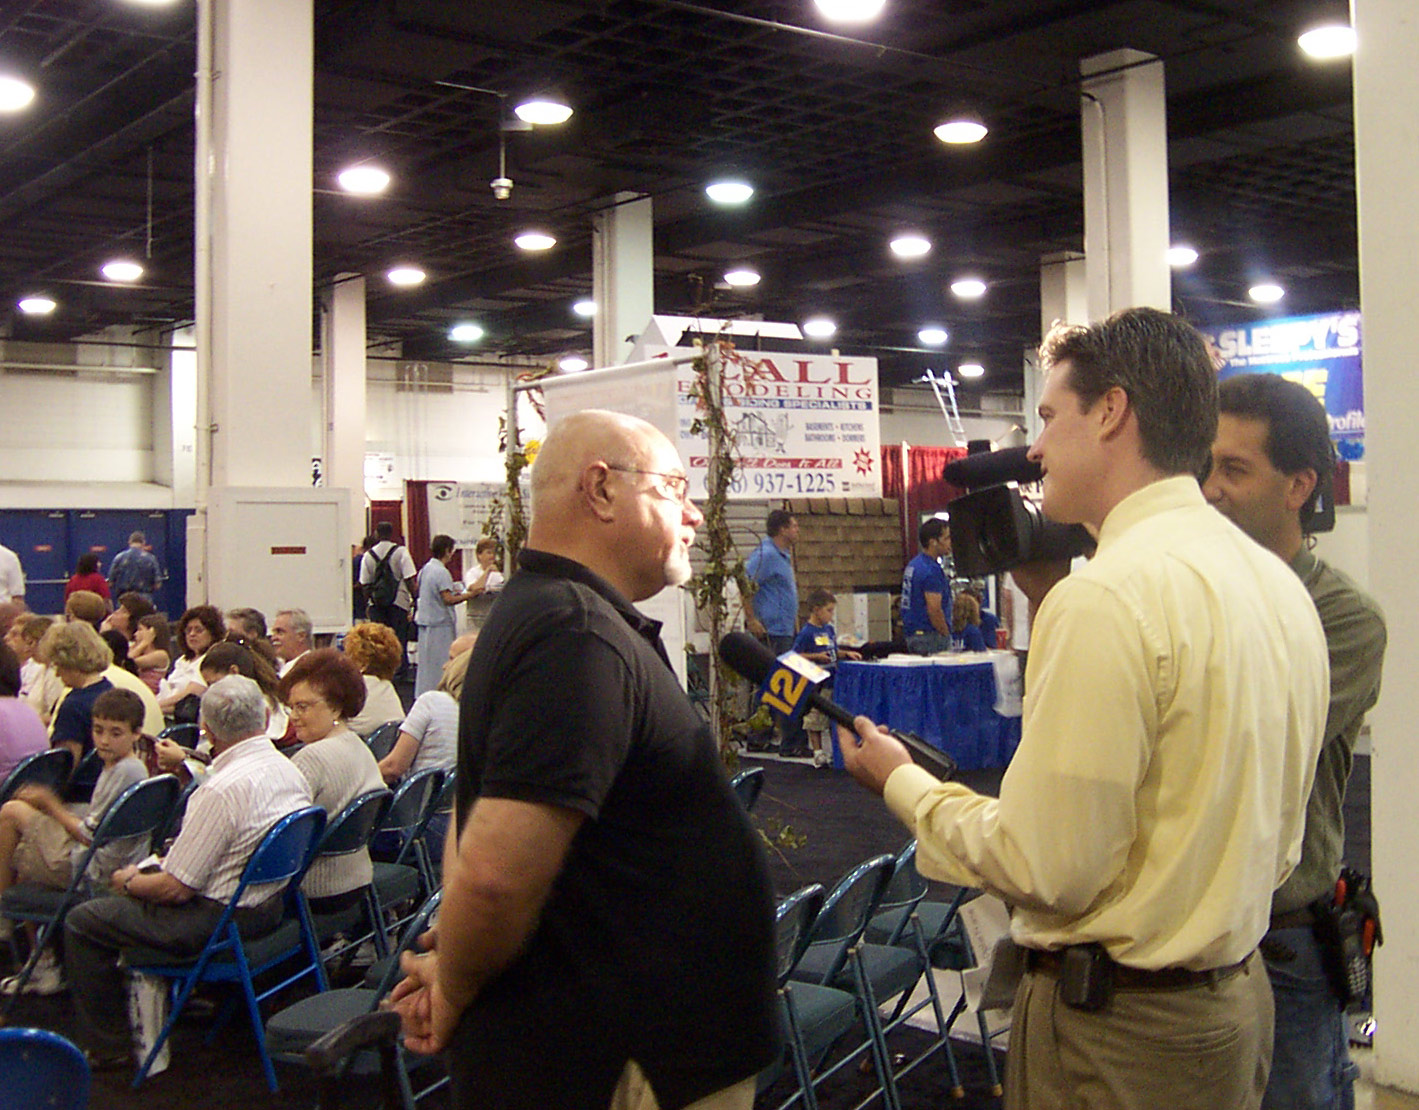 News 12 Long Island conducting an interview during a Home Show at the Nassau Coliseum.